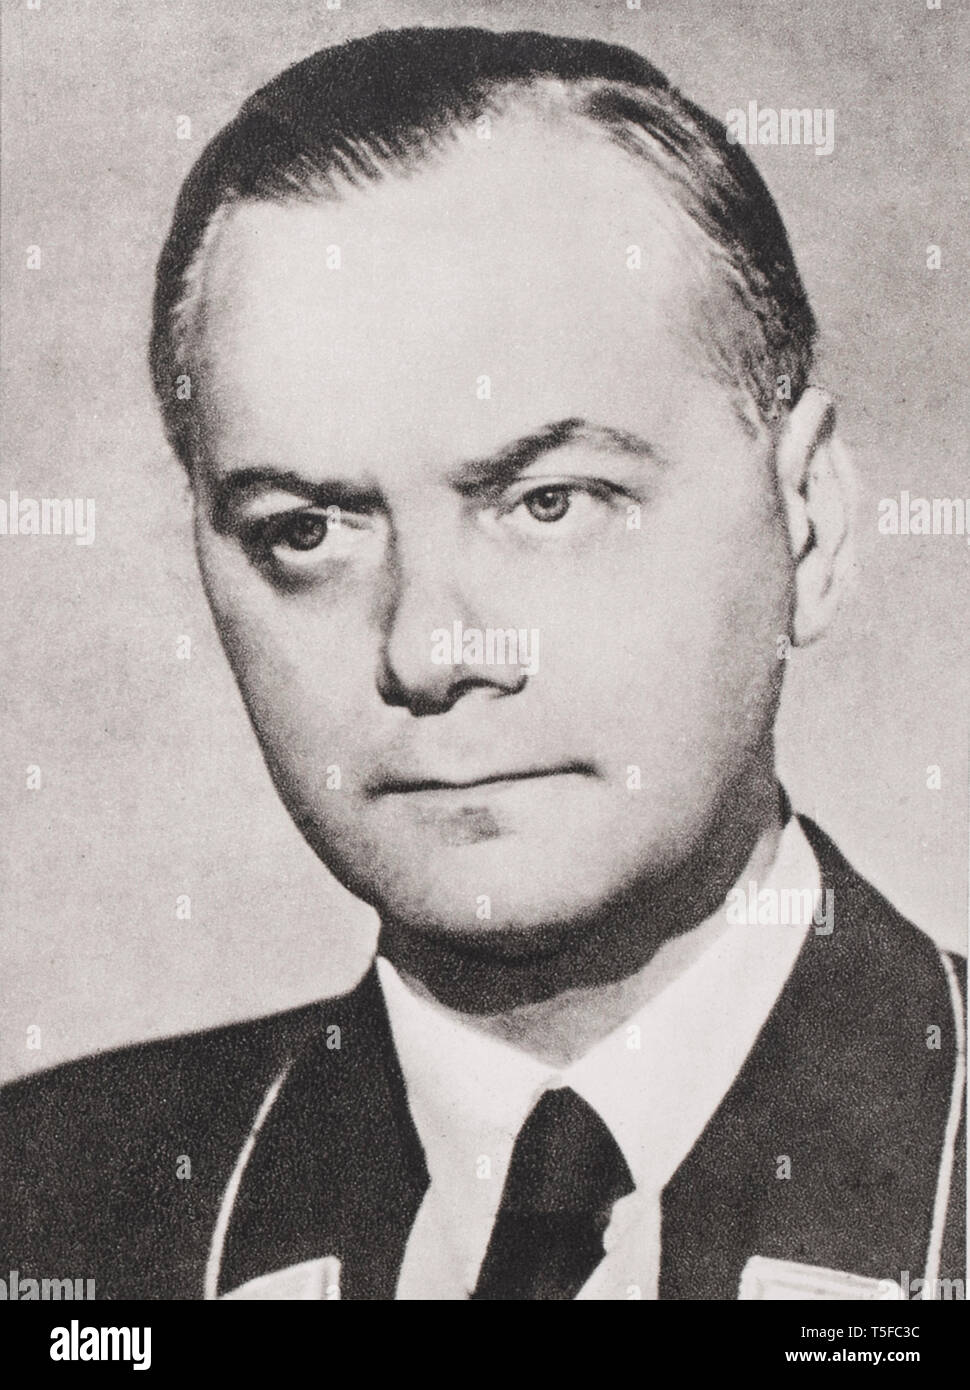 Portrait of Alfred Ernst Rosenberg (1893 – 1946) was a Baltic German-born theorist and an influential ideologue of the Nazi Party. Stock Photo